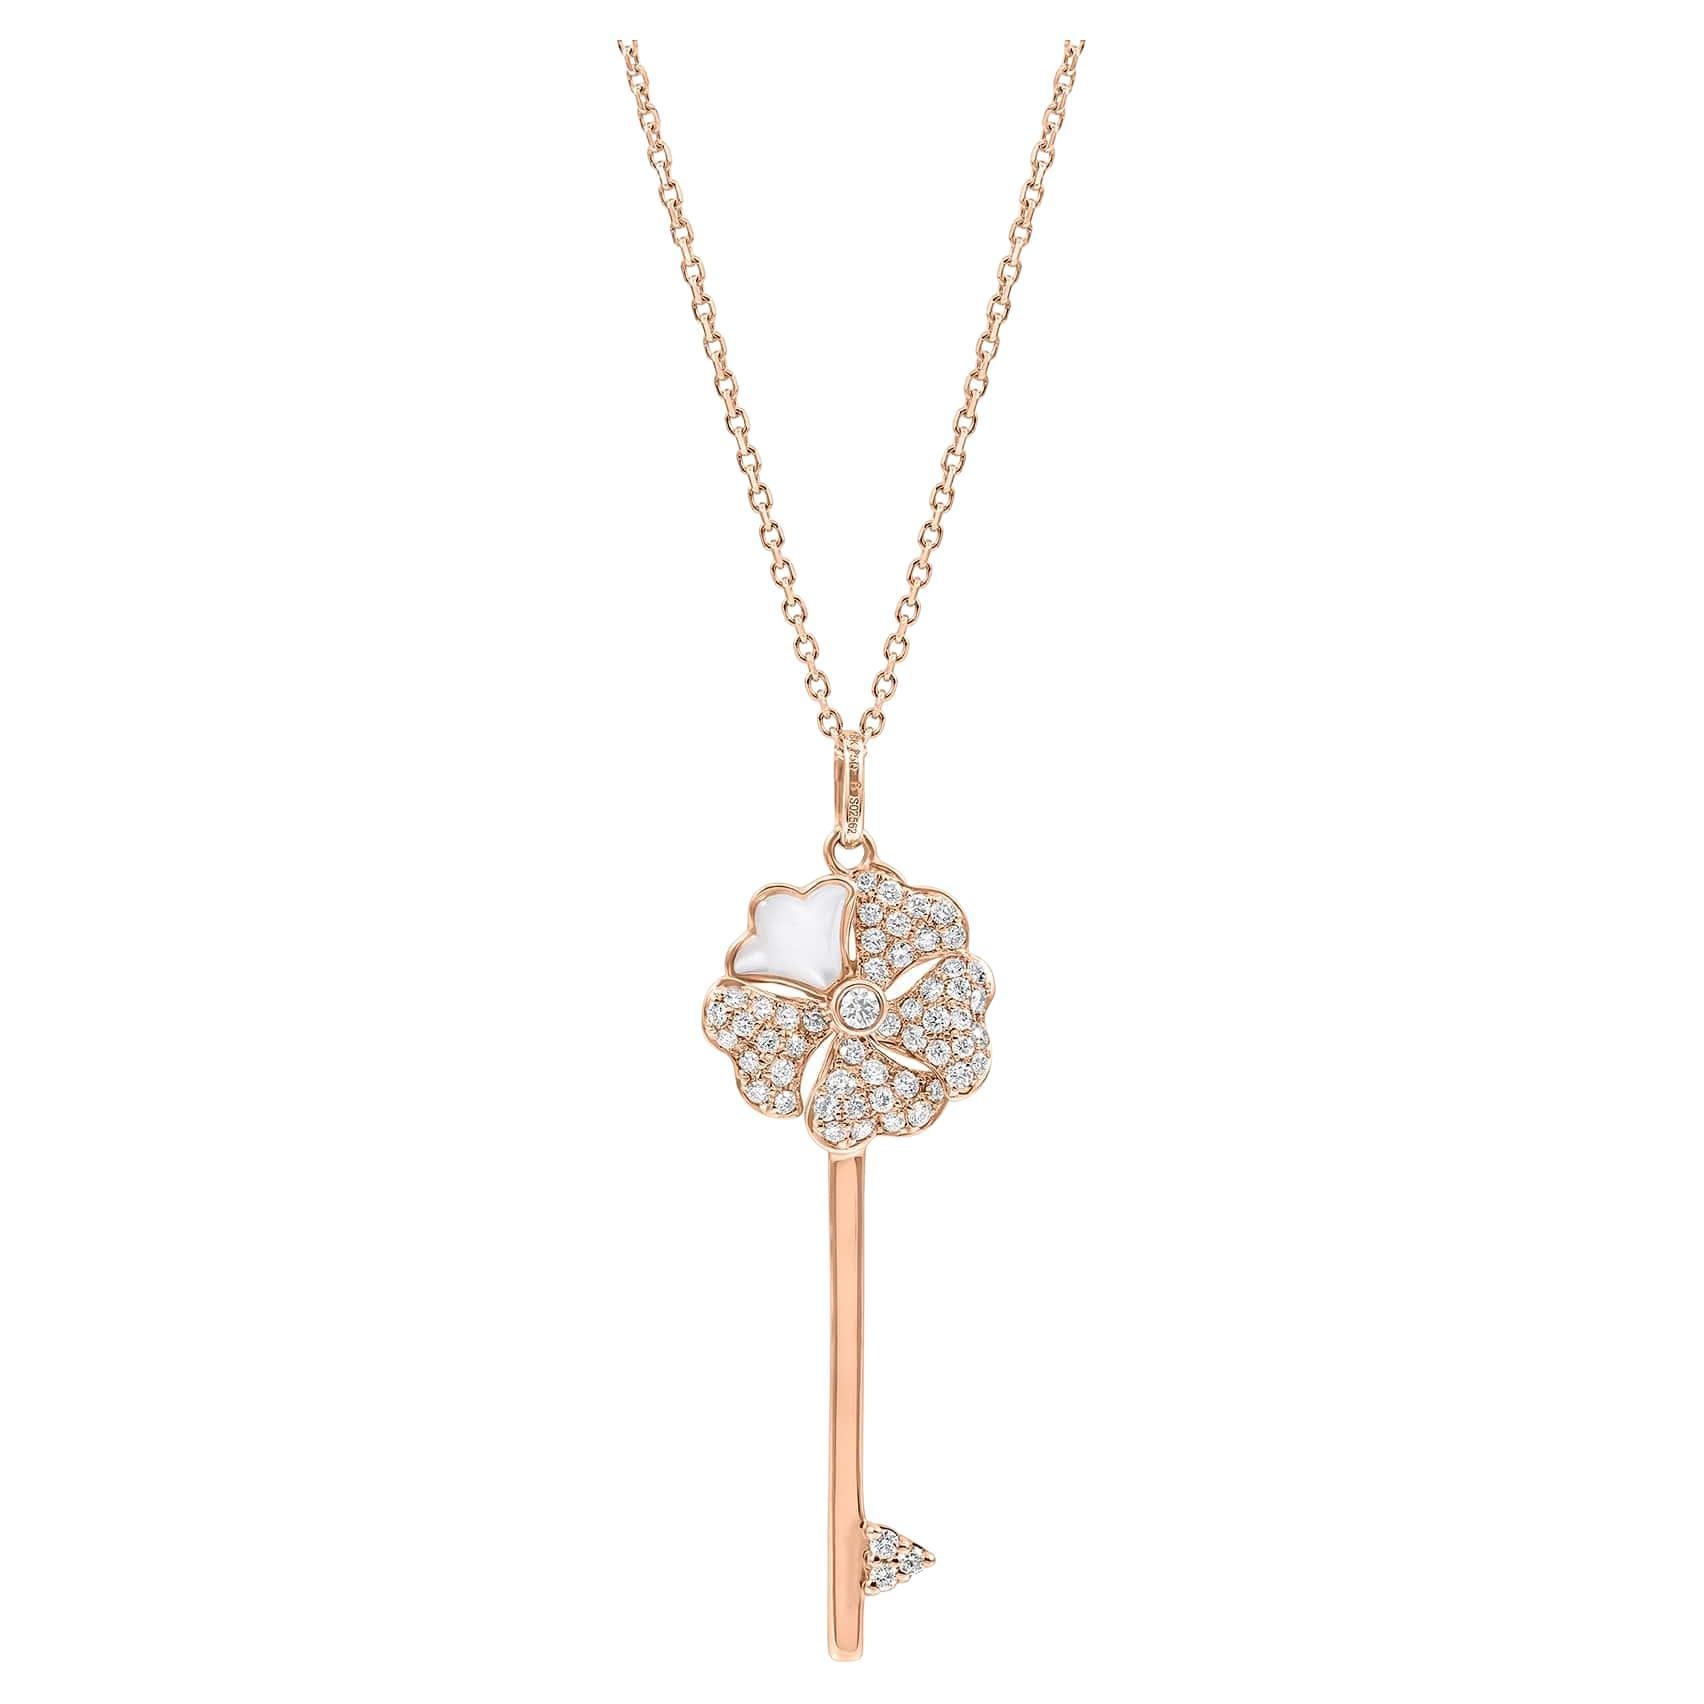 Bloom Diamond Key Necklace with Mother of Pearl in 18k Rose Gold For Sale